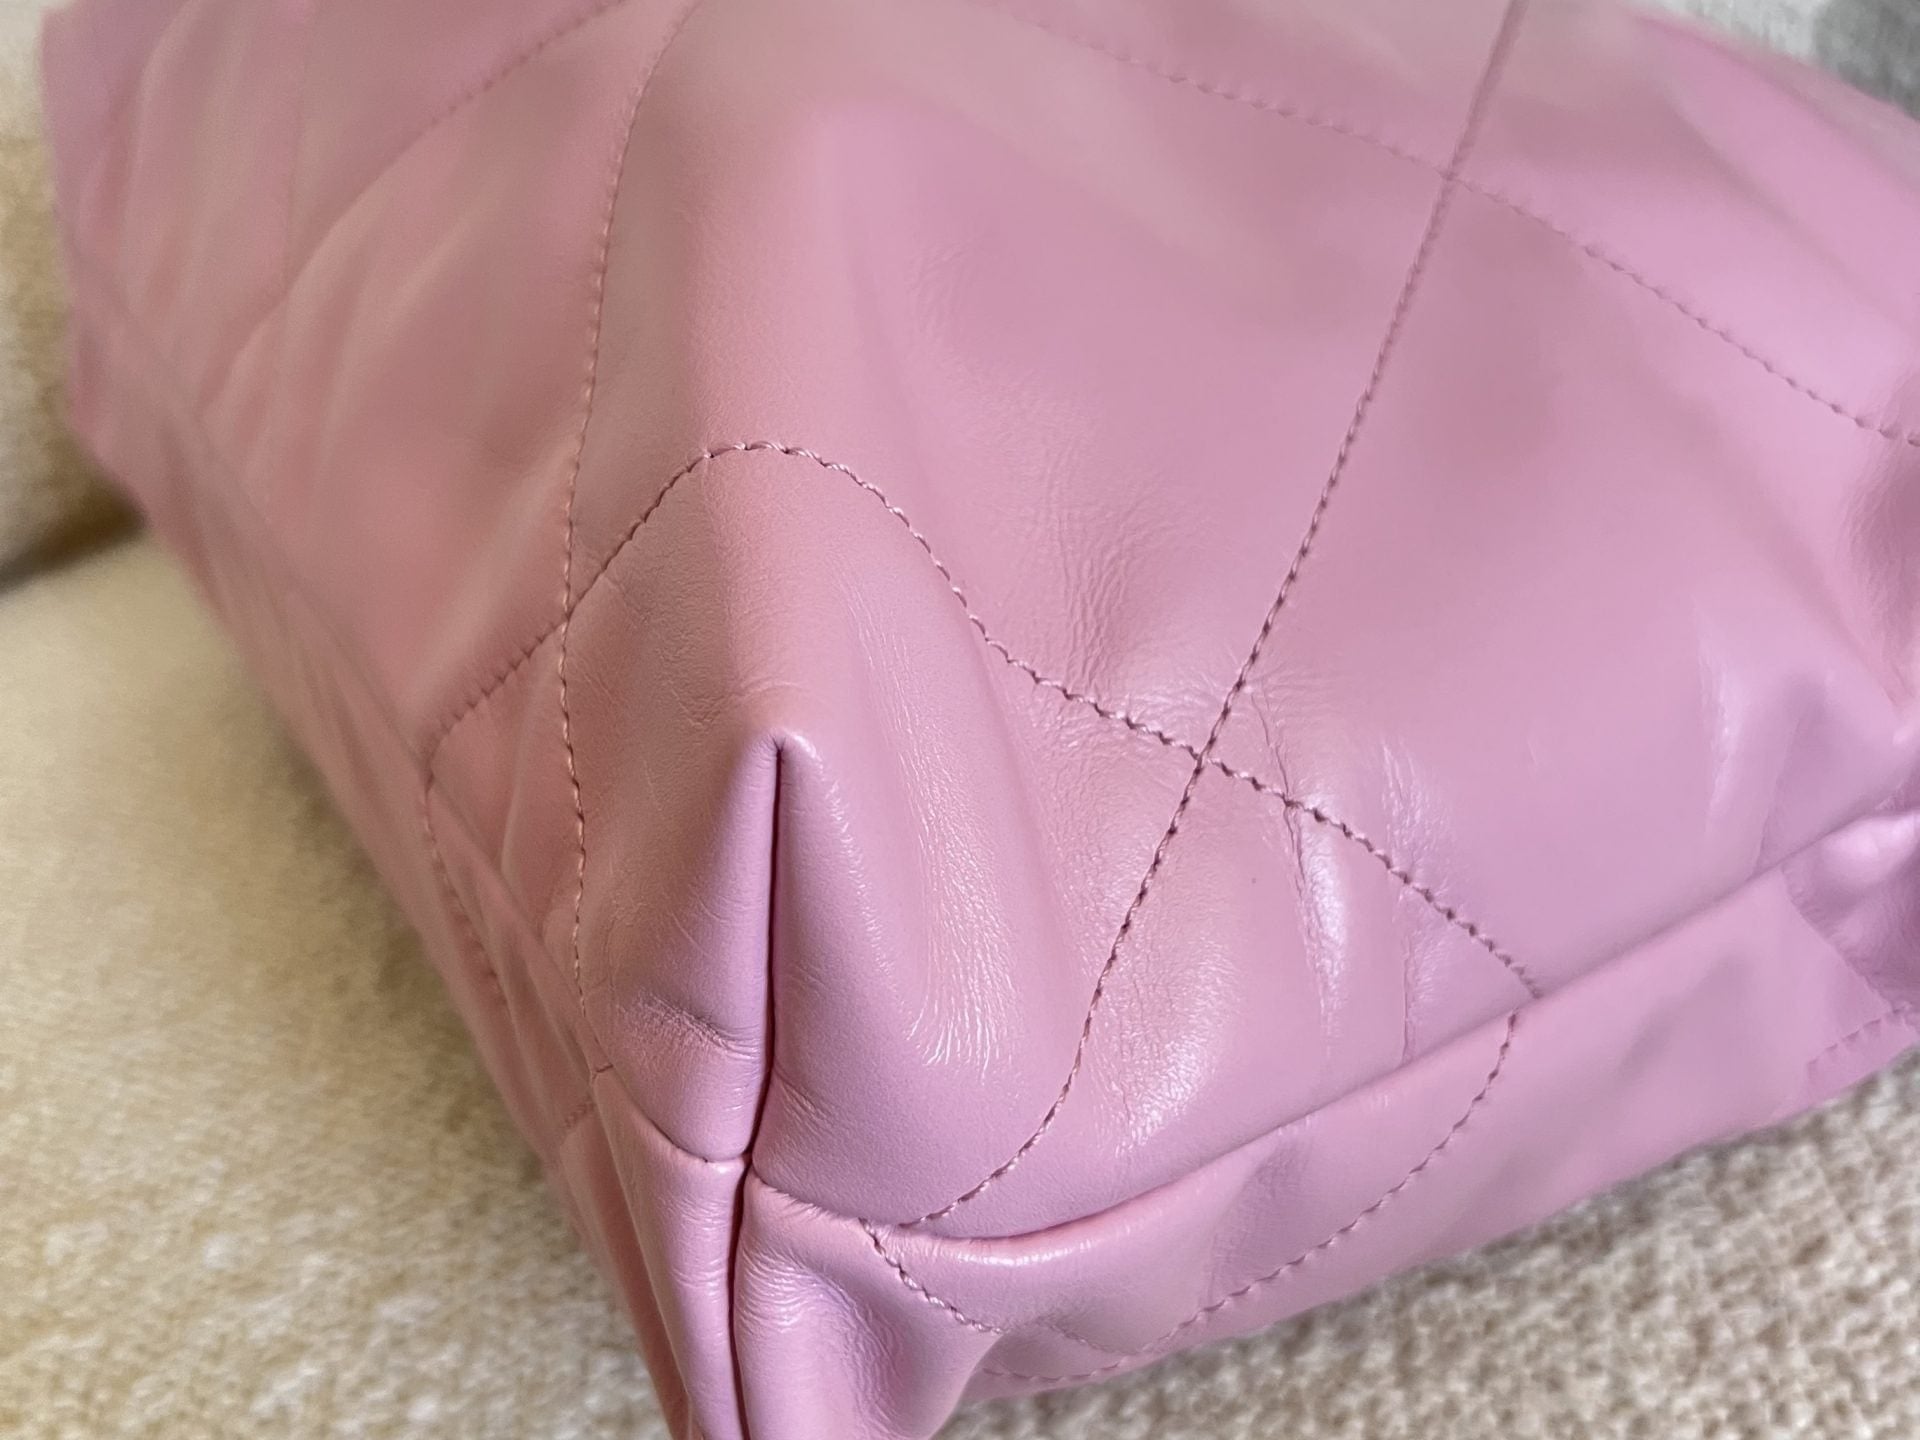 CHANEL Handbag Chanel 22 Pink Shiny Calfskin Quilted Drawstring Bag Small GHW - Redeluxe